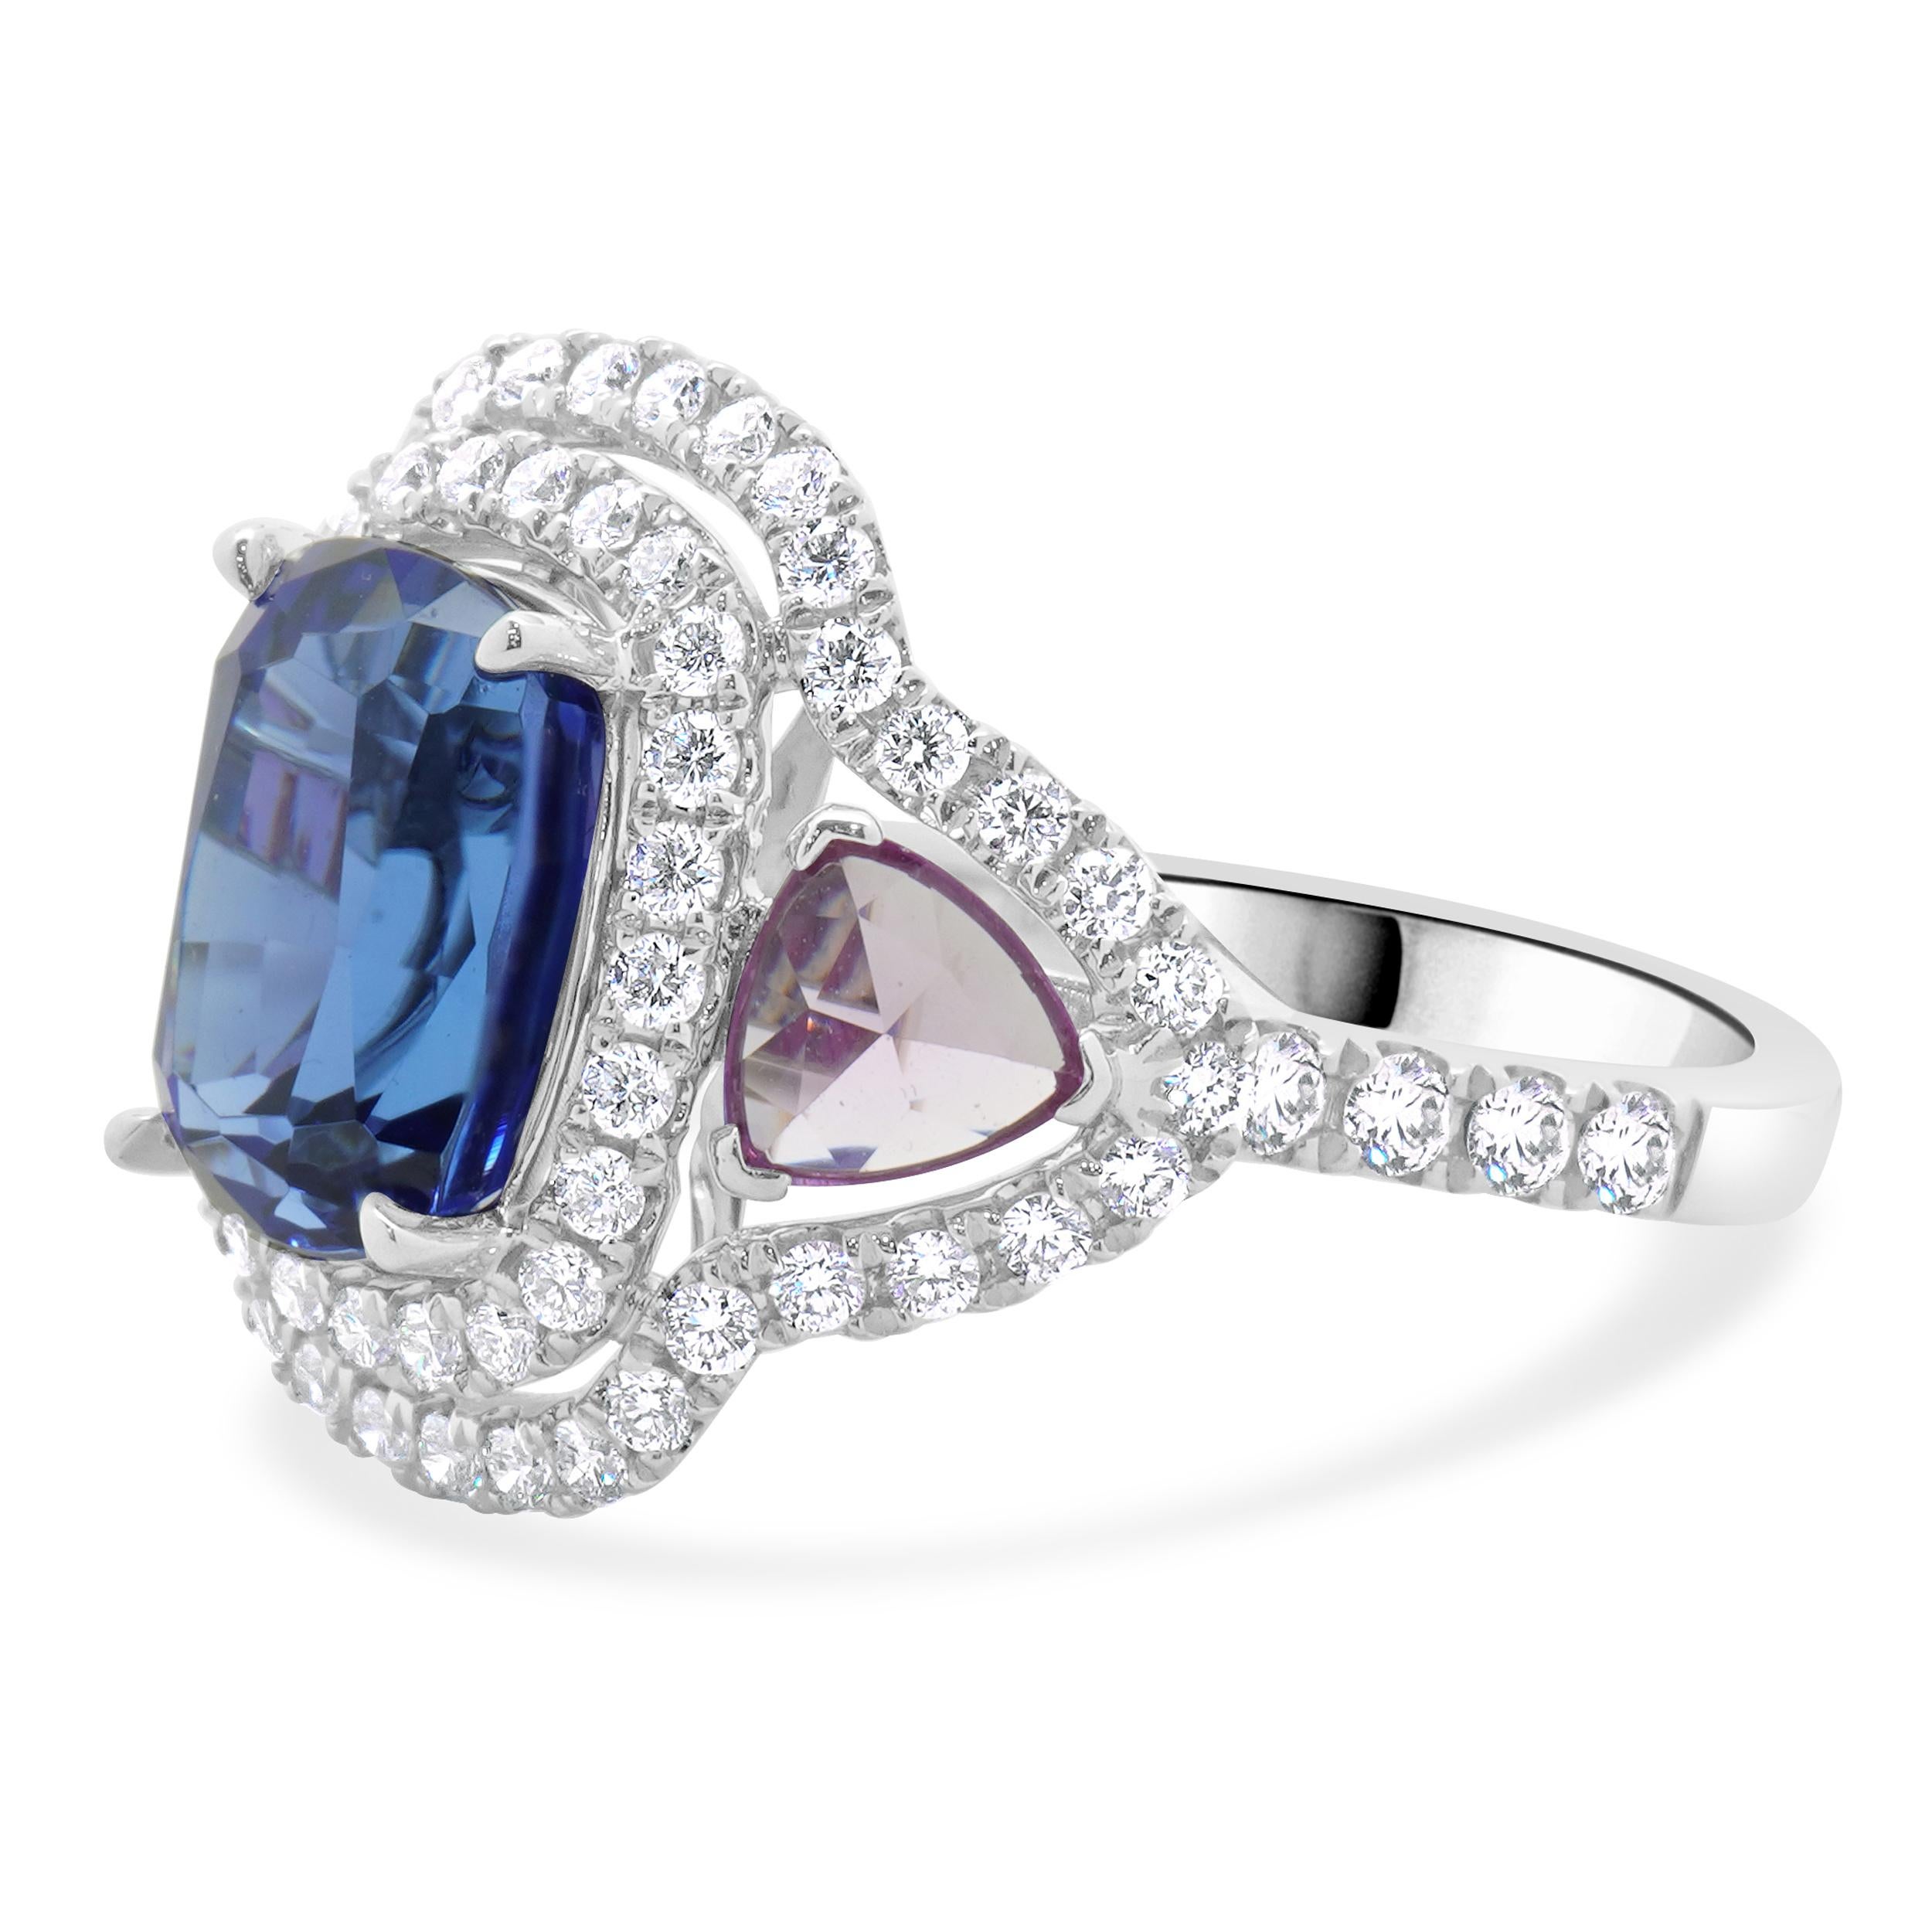 Material: 18K white gold
Diamond: round brilliant cut = .90cttw
Color: G
Clarity: VS2
Tanzanite: 1 cushion cut = 4.48cttw
Pink Sapphire: 2 rose cut trillions = 1.00cttw
Ring Size: 6.5 (please allow up to 2 additional business days for sizing